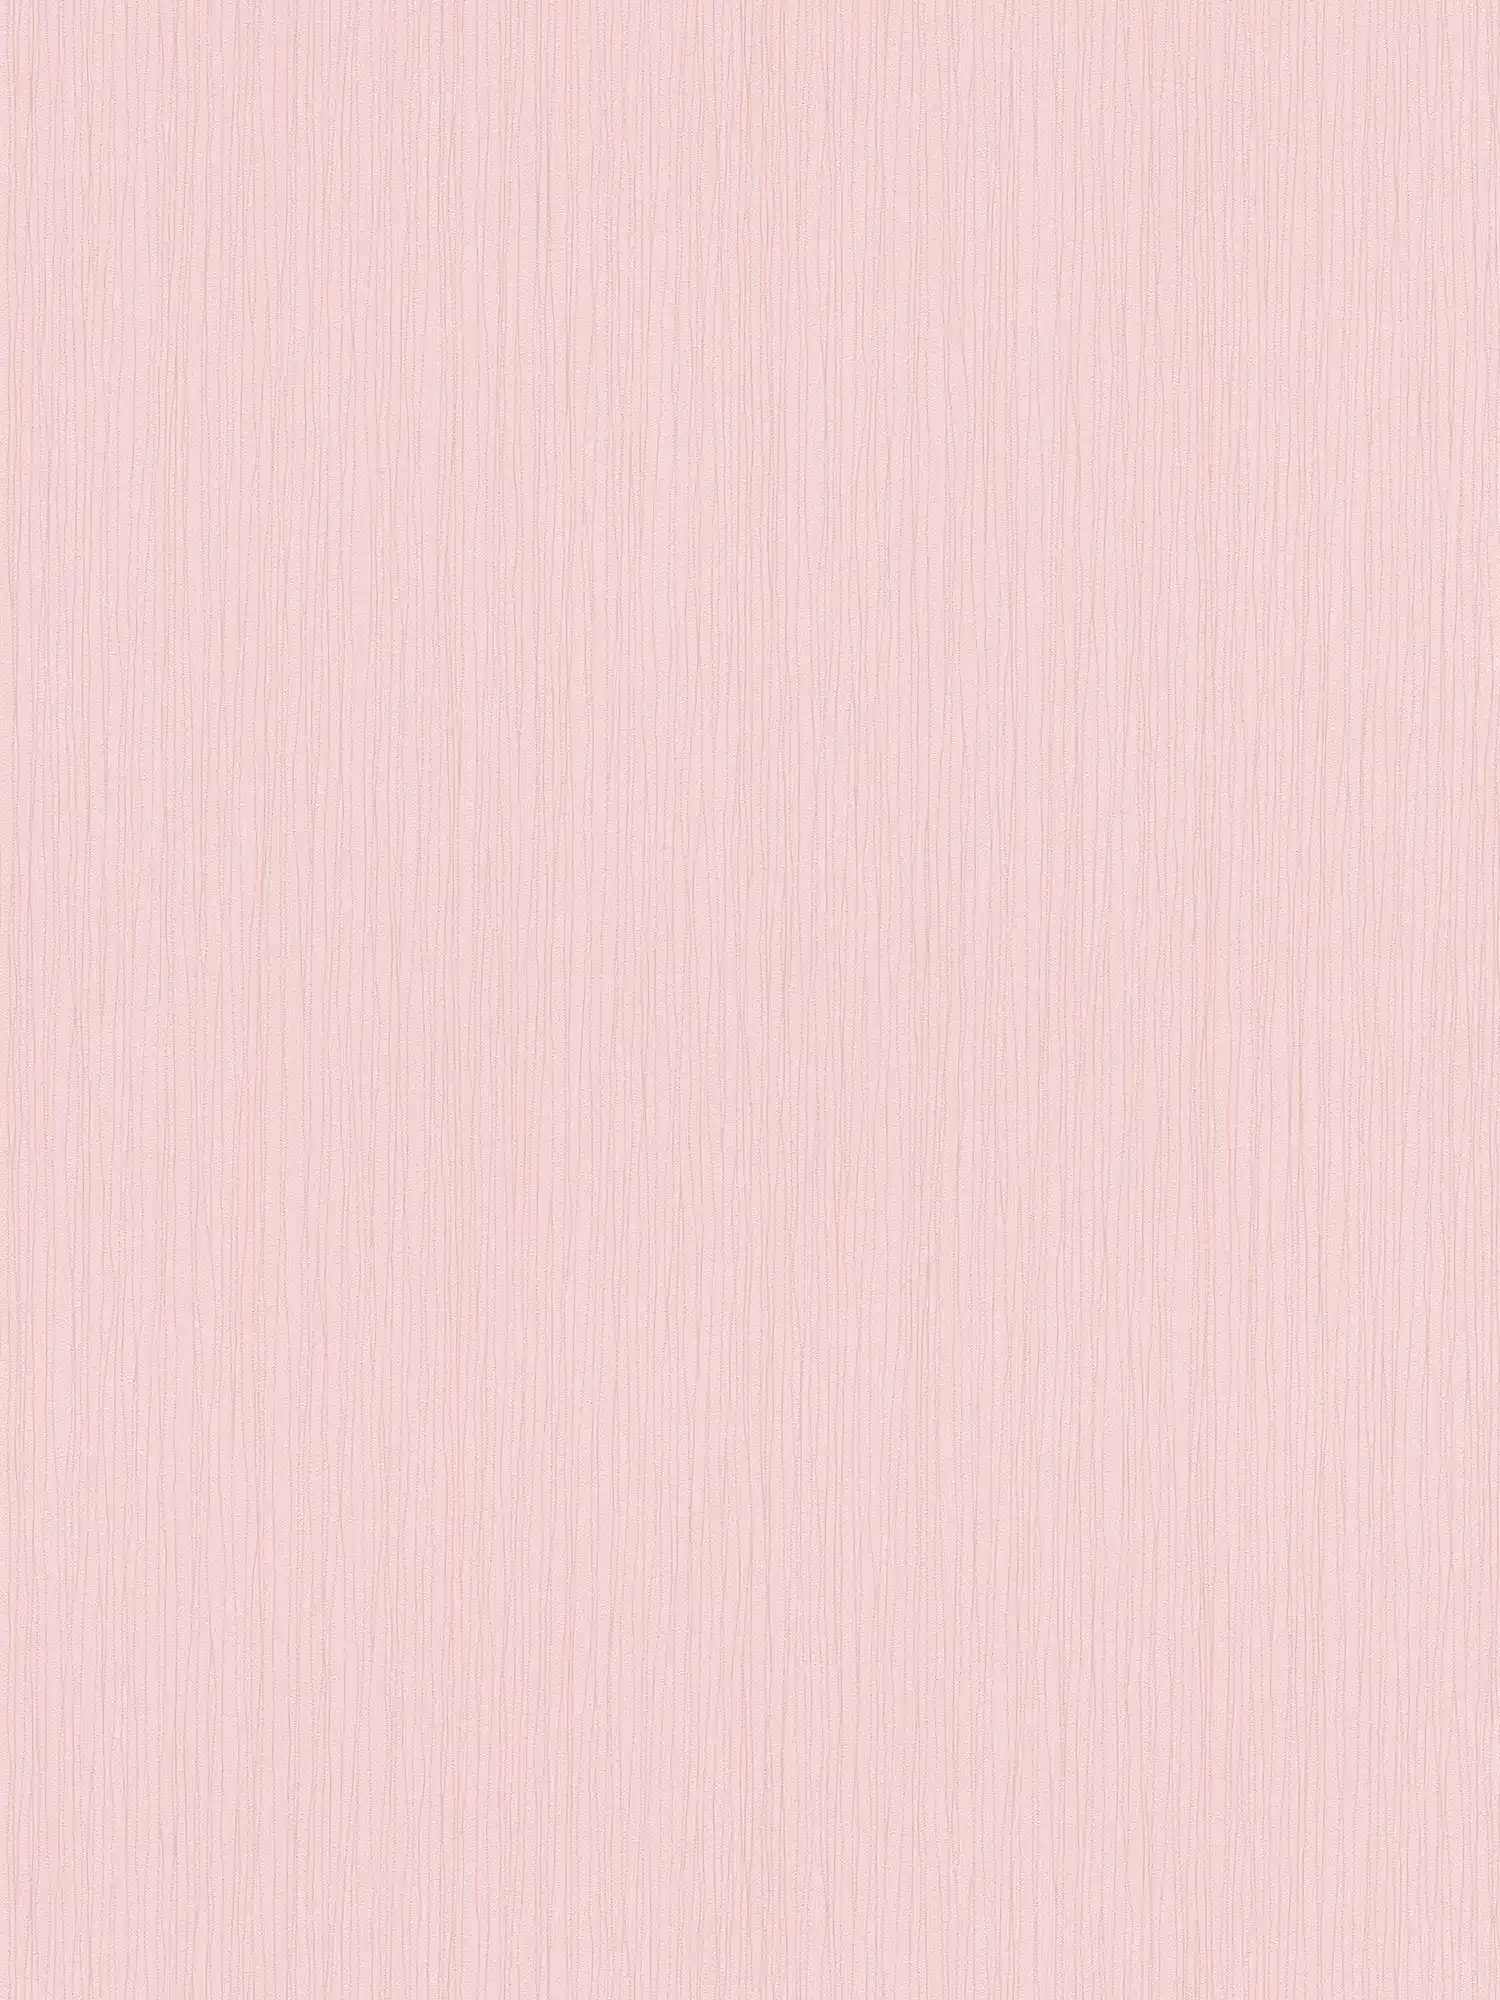 Nursery wallpaper for girls with lines structure - pink
